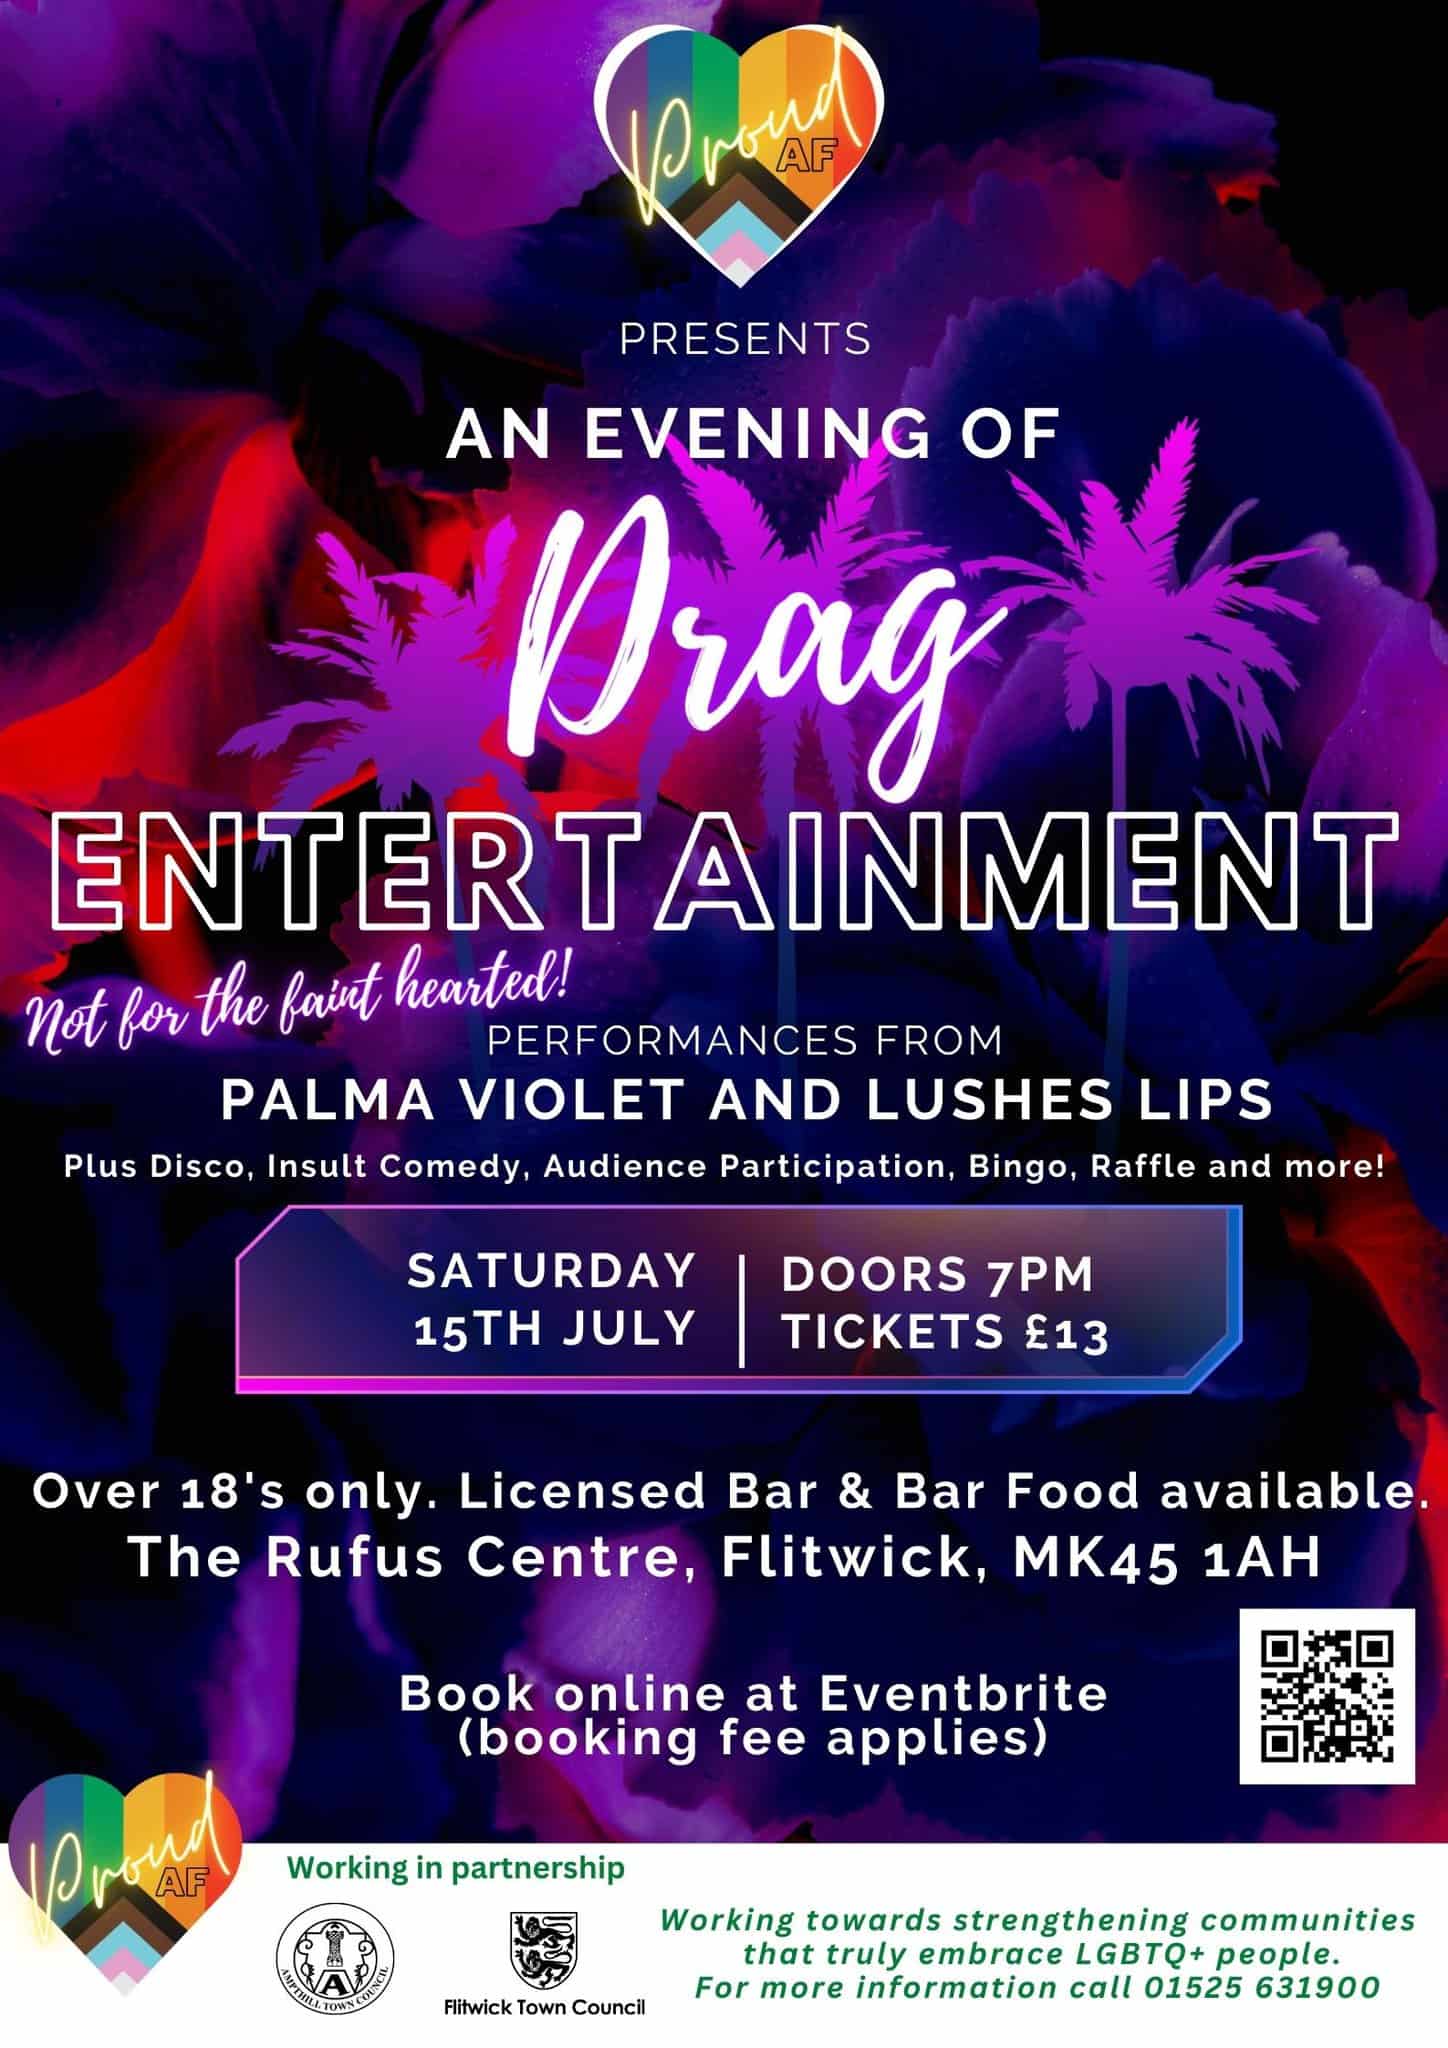 Evening of Drag Poster